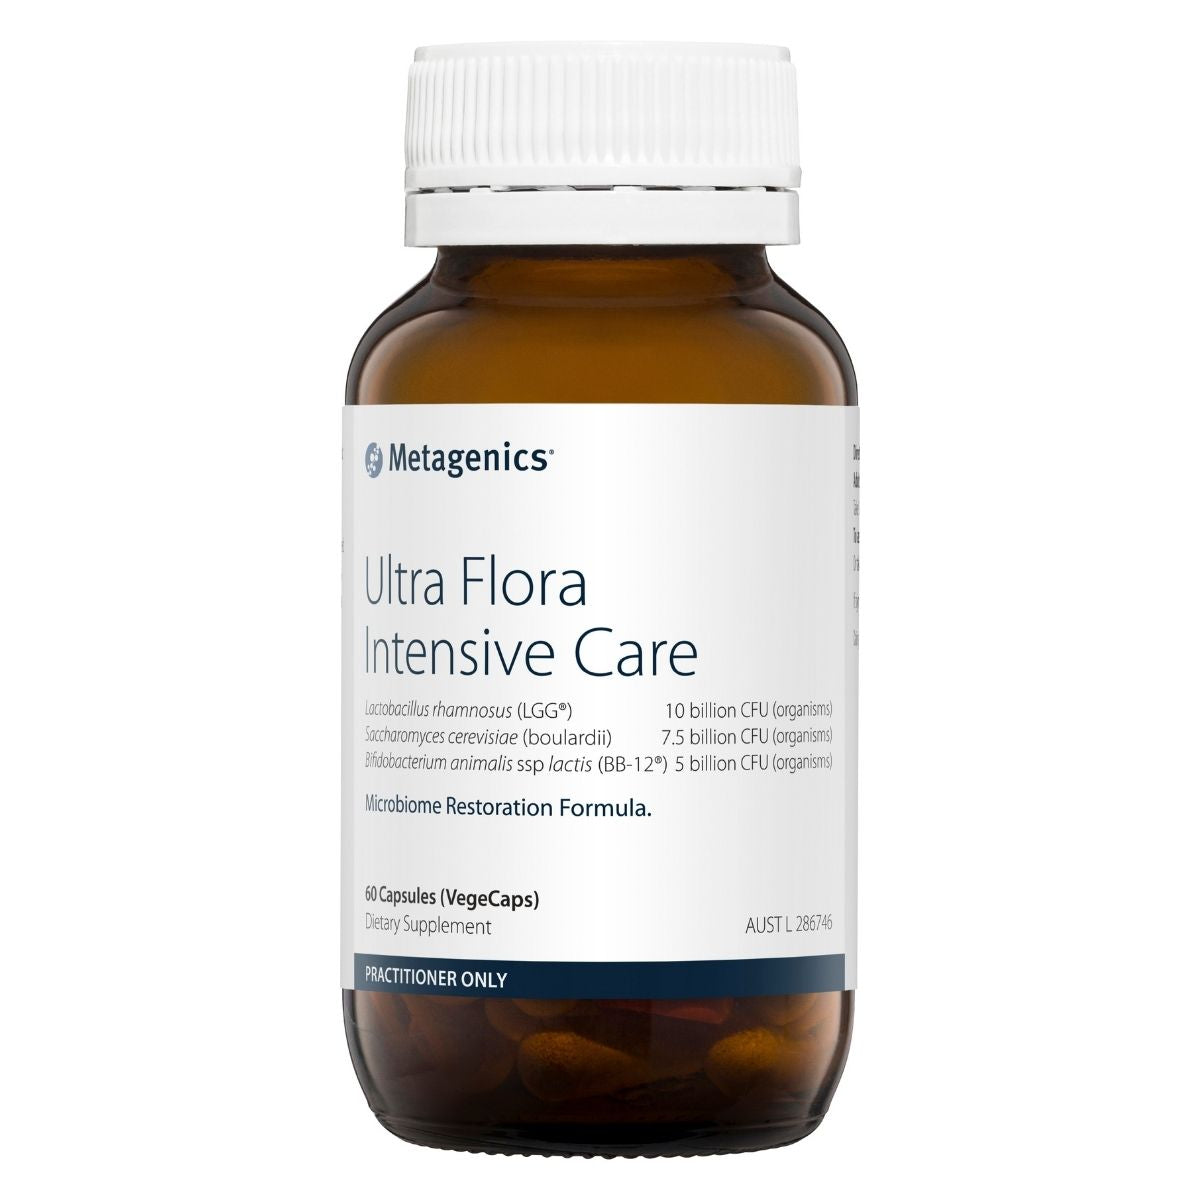 Metagenics Ultra Flora Intensive Care 60 Capsules | Vitality And Wellness Centre